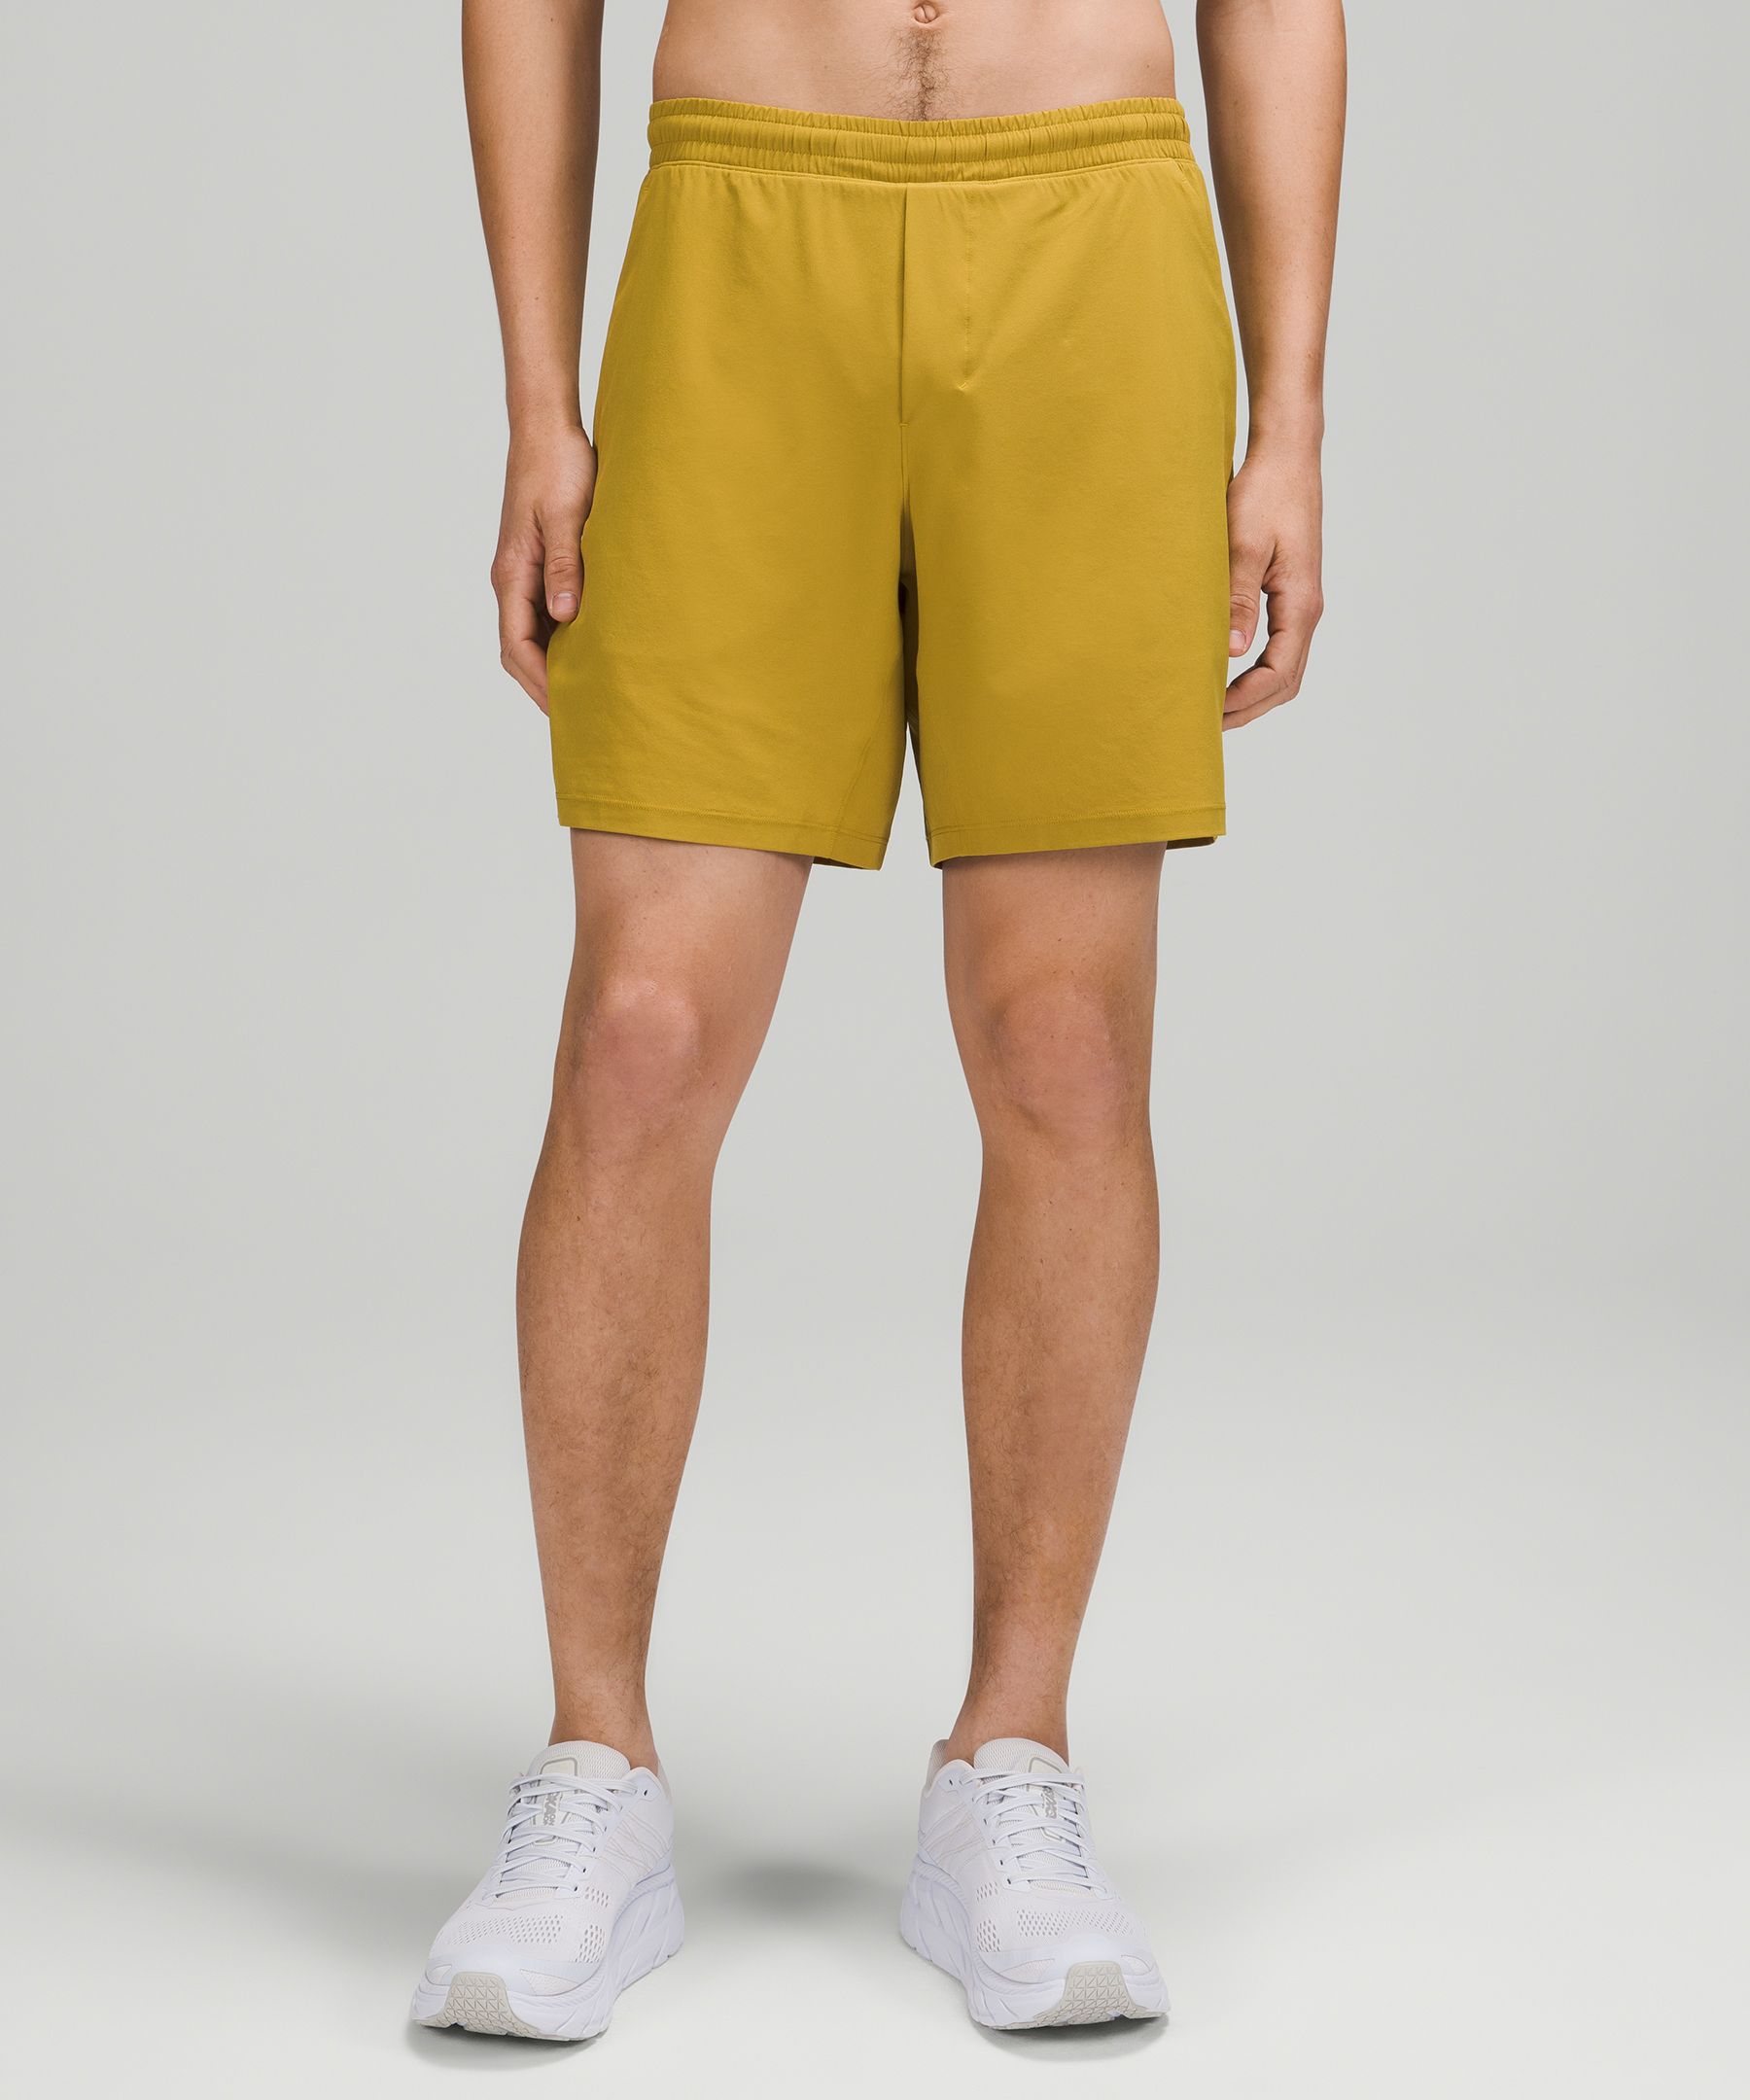 Lululemon Pace Breaker Lined Shorts 7" In Auric Gold